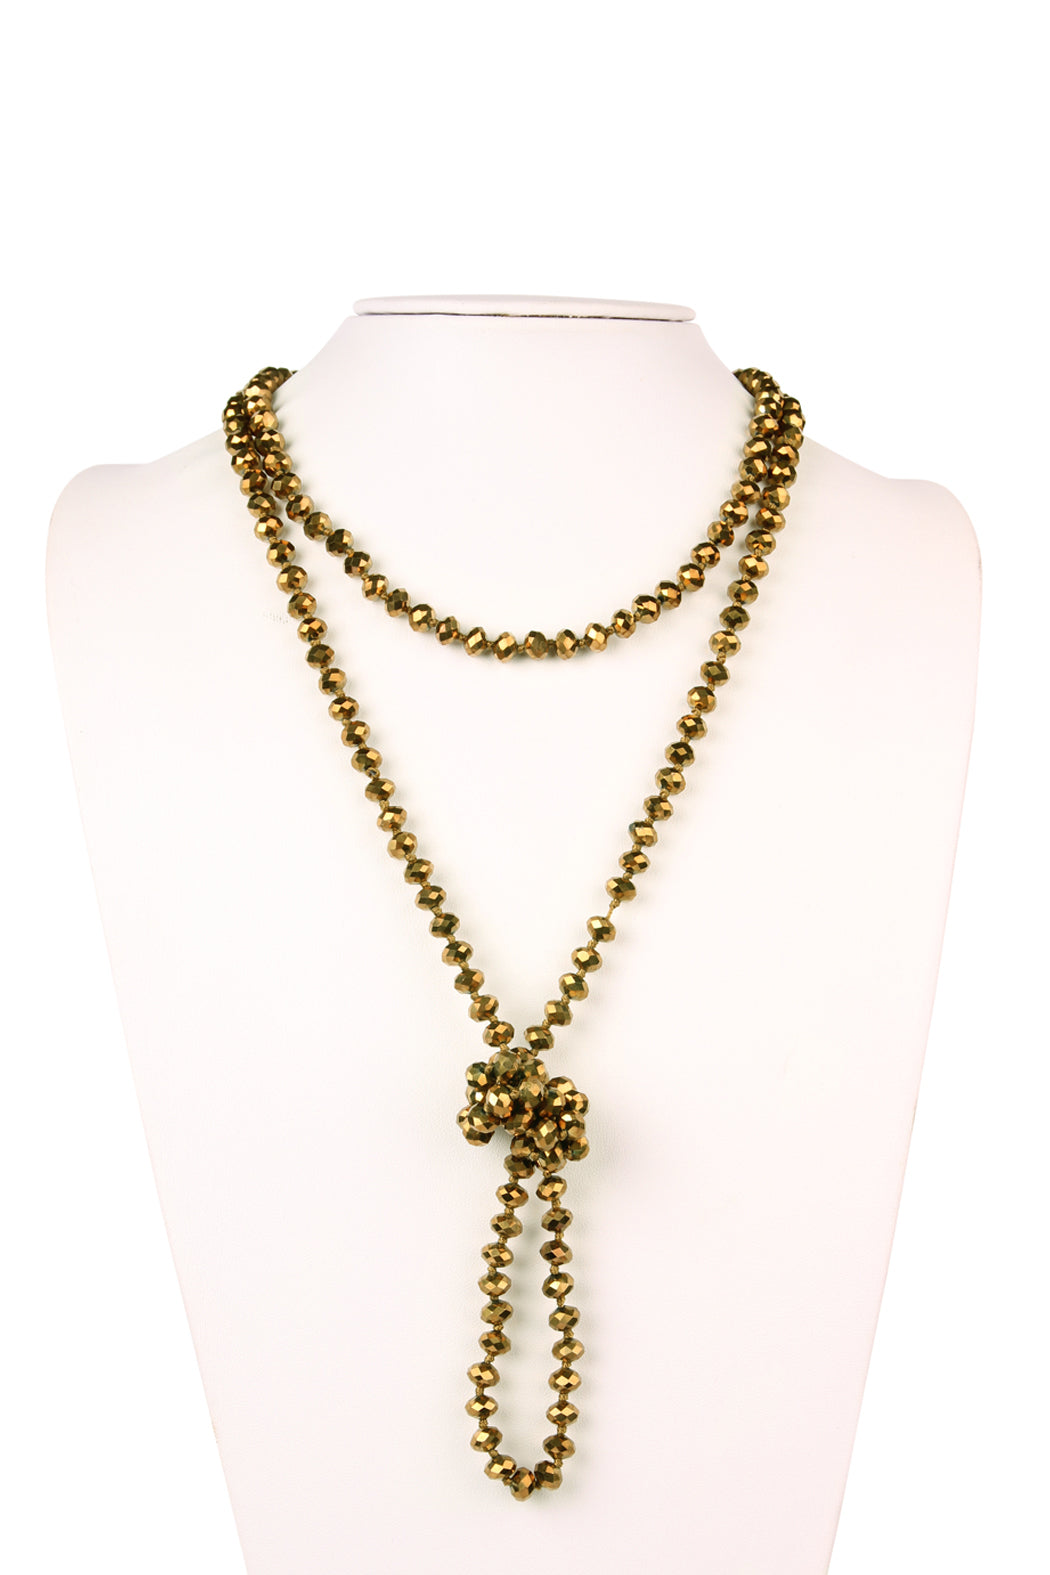 LONGLINE HAND KNOTTED NECKLACE